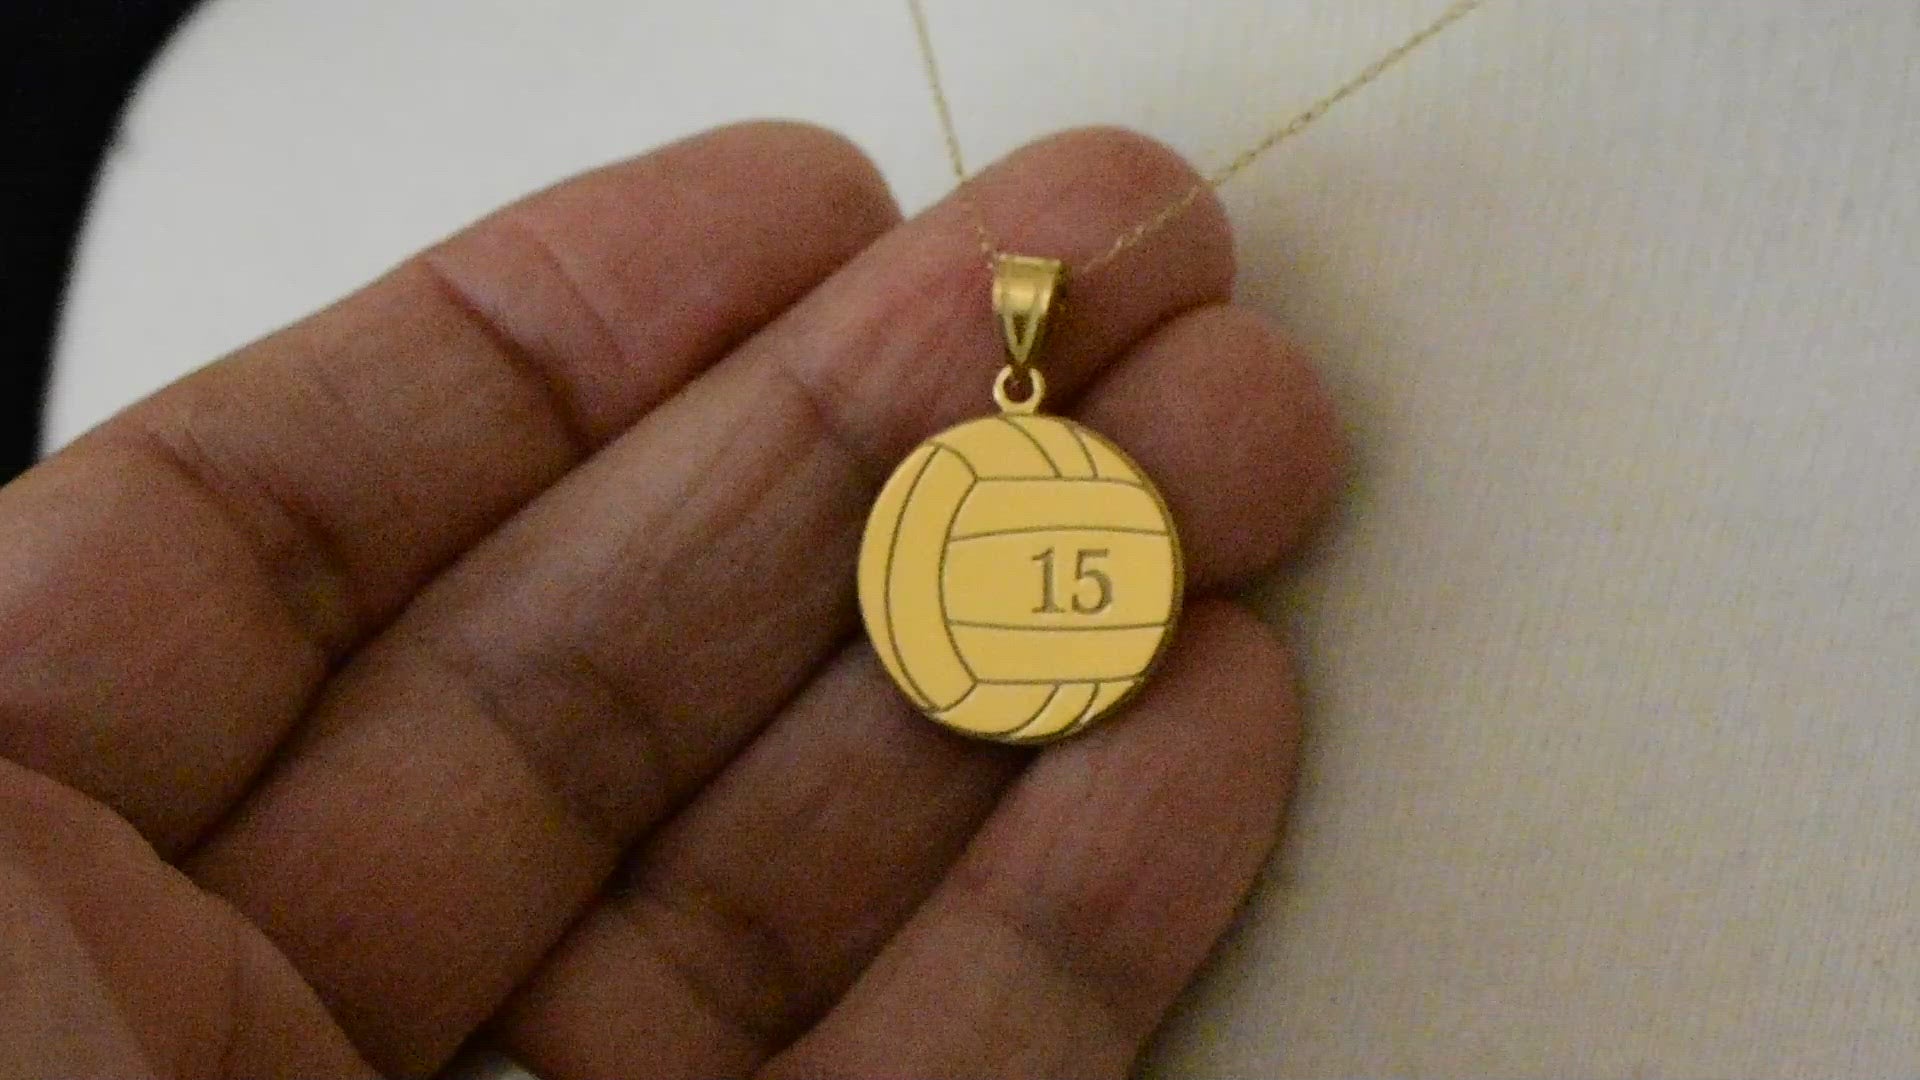 14k 10k Gold Sterling Silver Volleyball Personalized Engraved Pendant